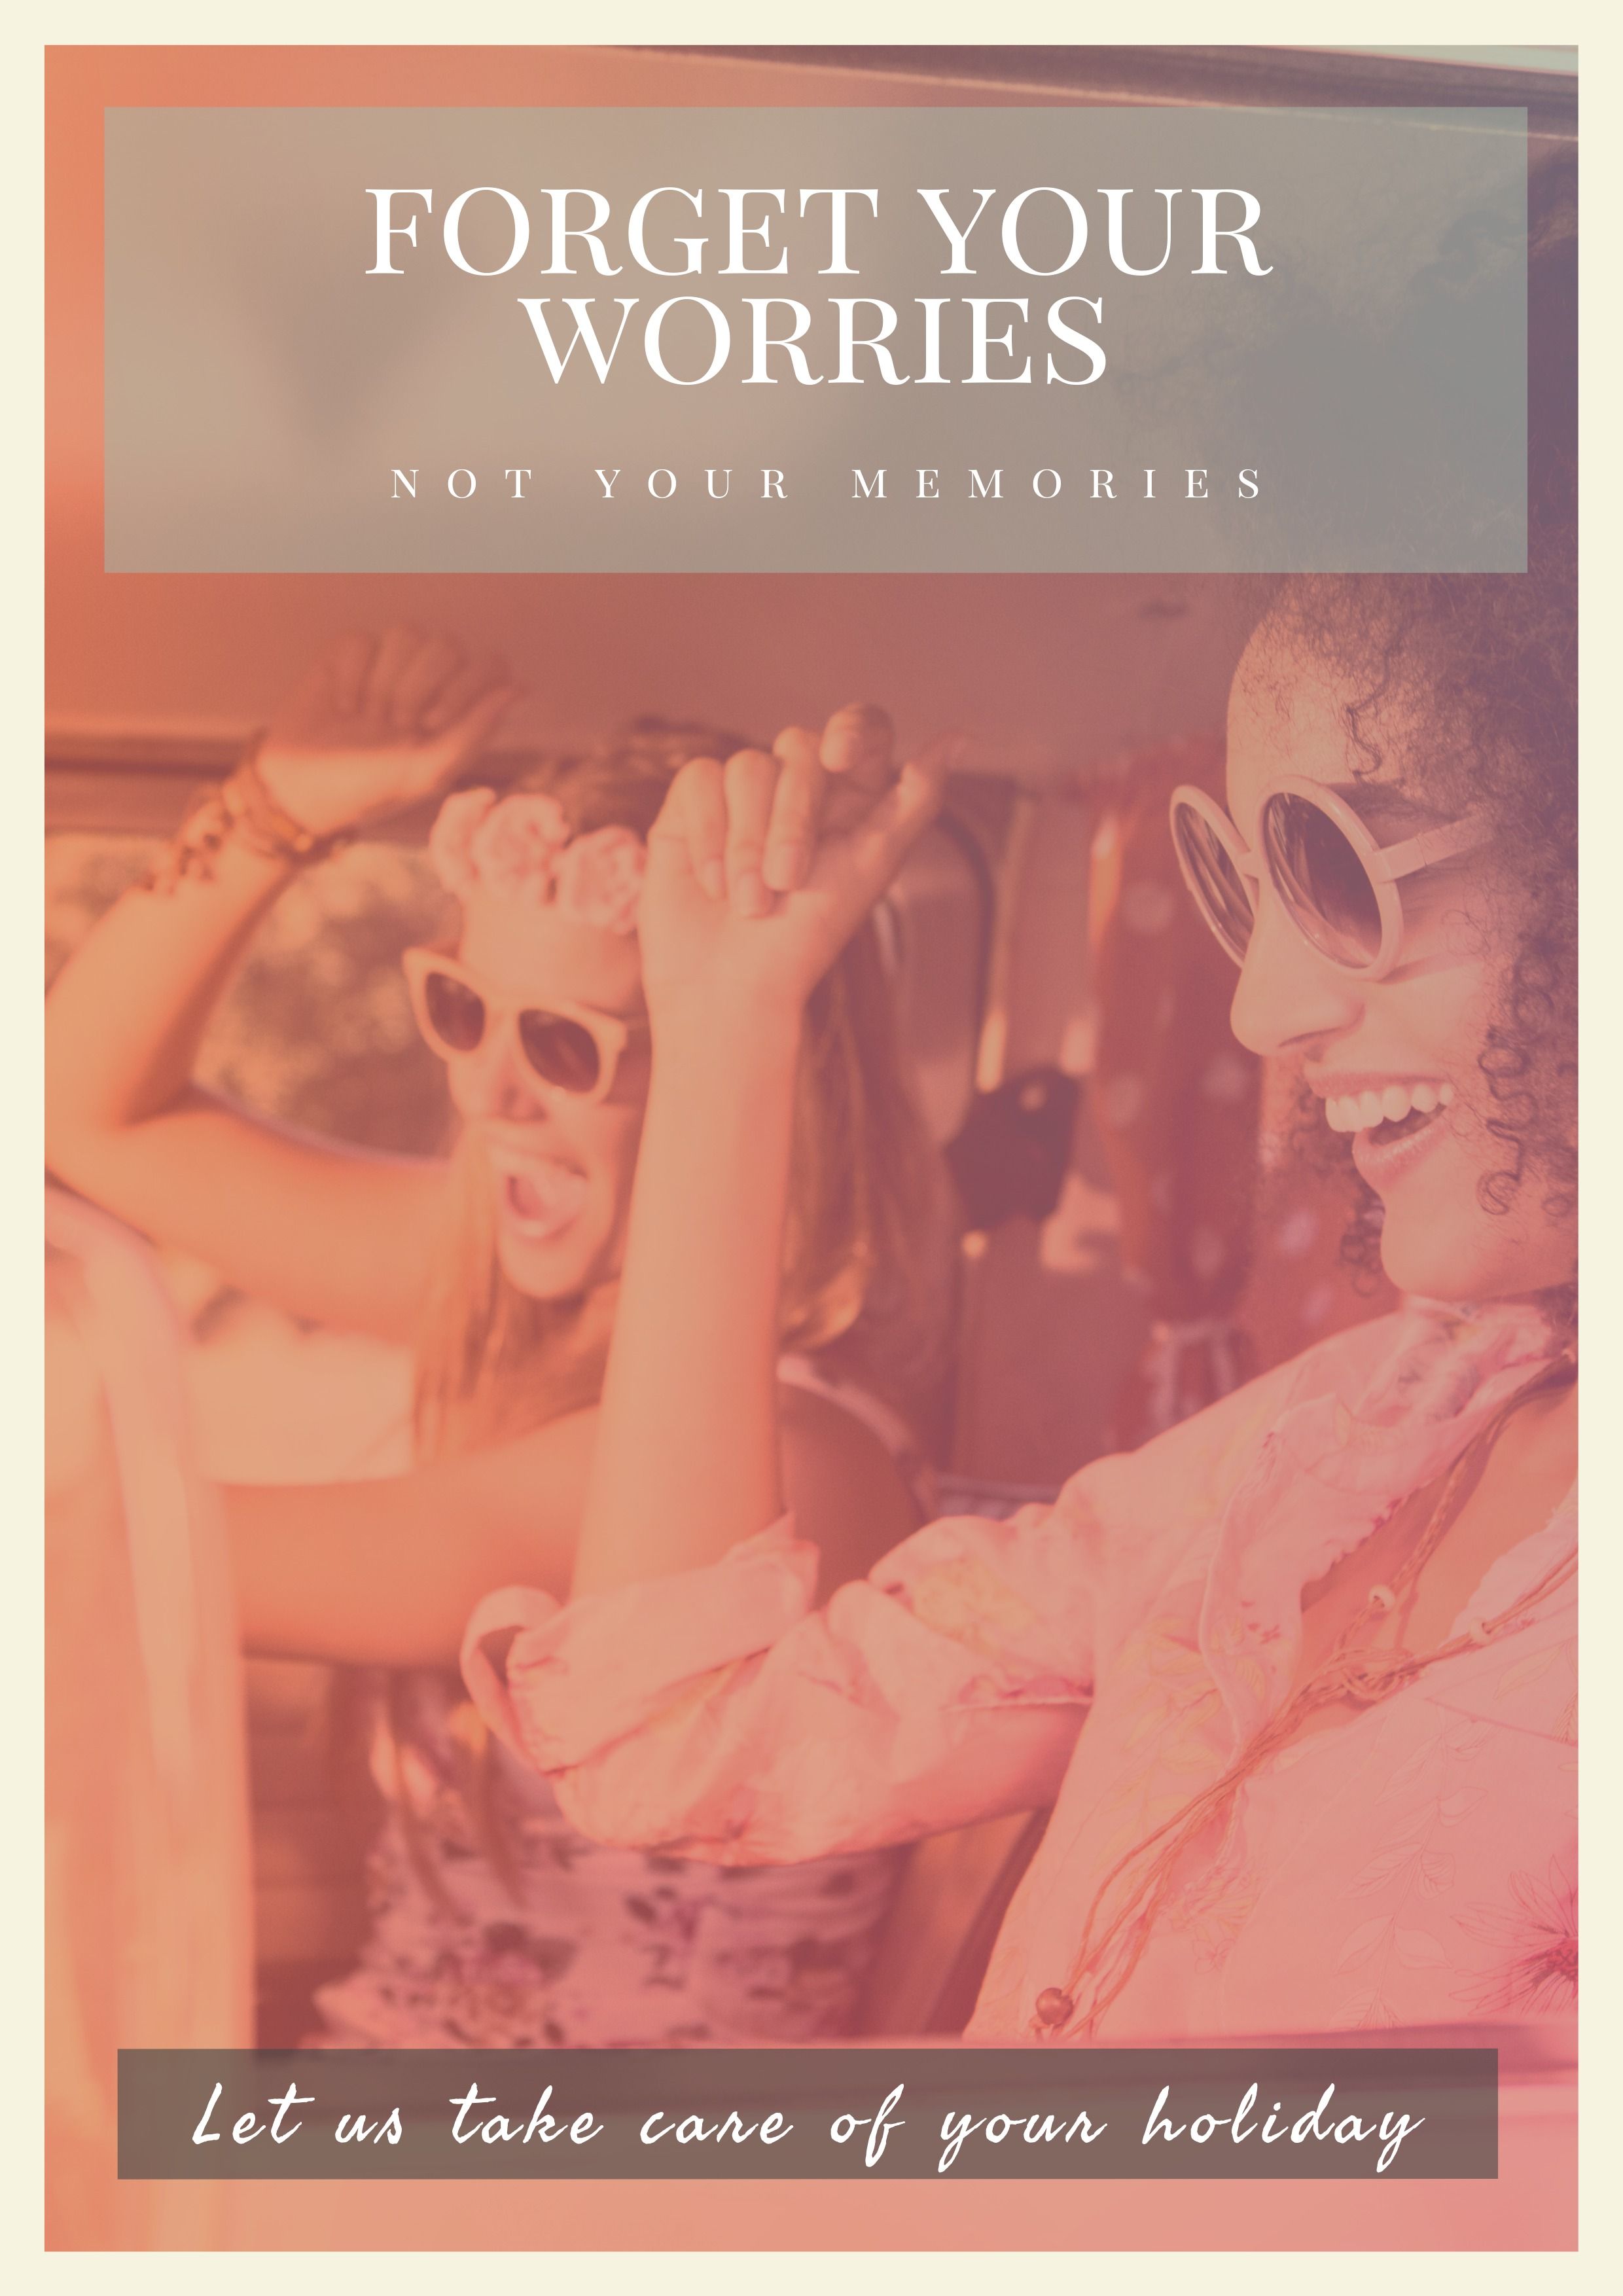 A holiday ad showing women going on a road trip with text forget your worries not your memories - A step-by-step beginner's guide to establishing an online presence on a tight budget - Image